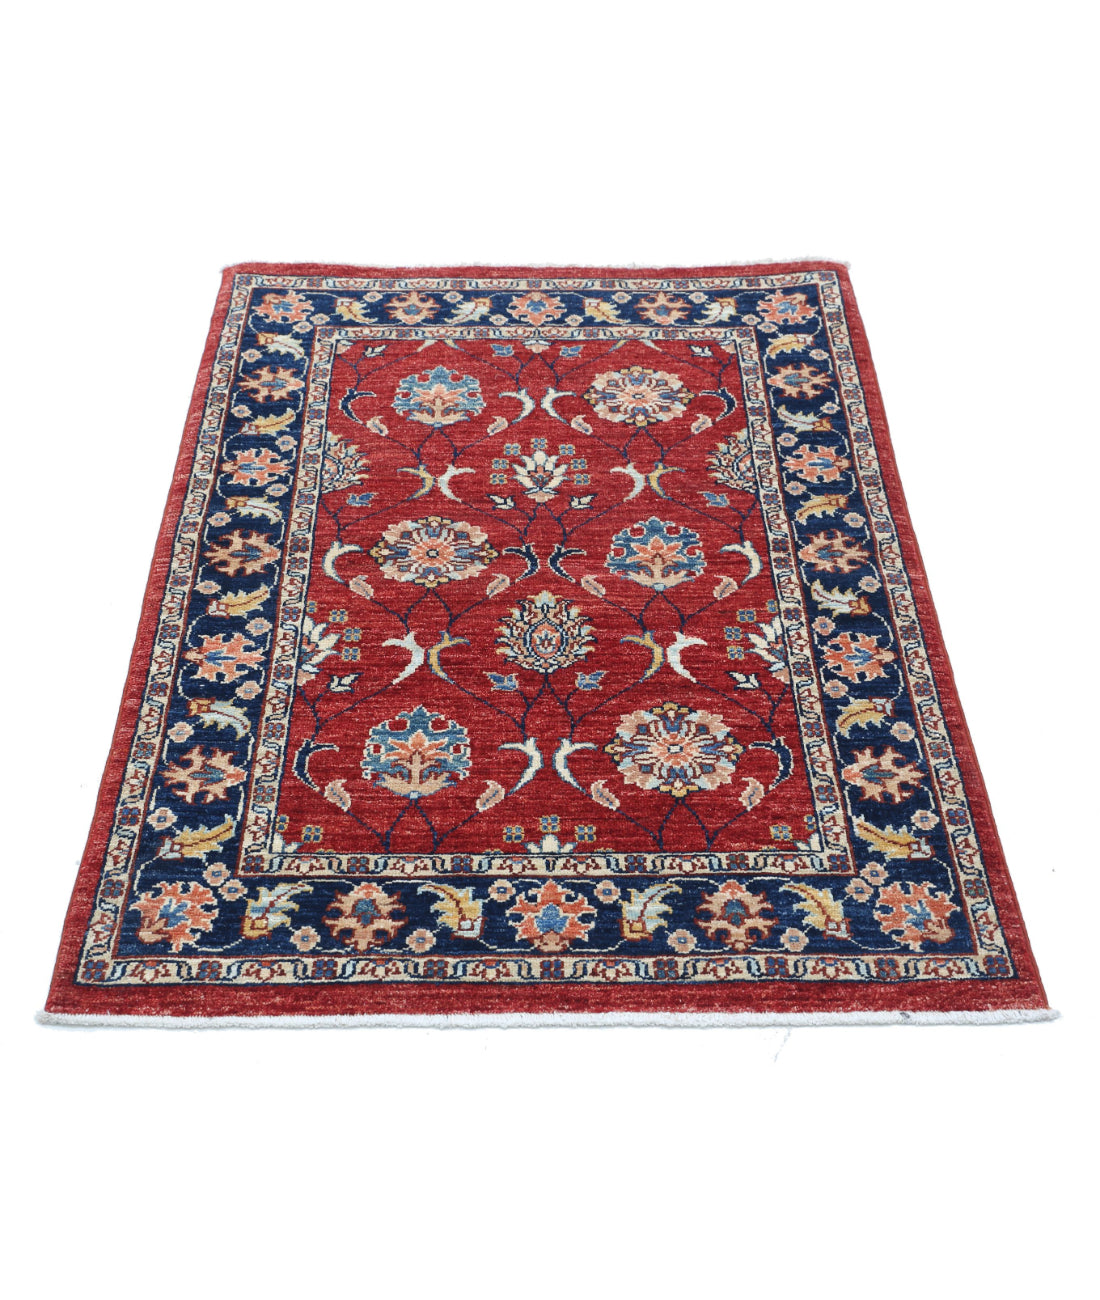 Ziegler 2'9'' X 4'1'' Hand-Knotted Wool Rug 2'9'' x 4'1'' (83 X 123) / Red / Blue